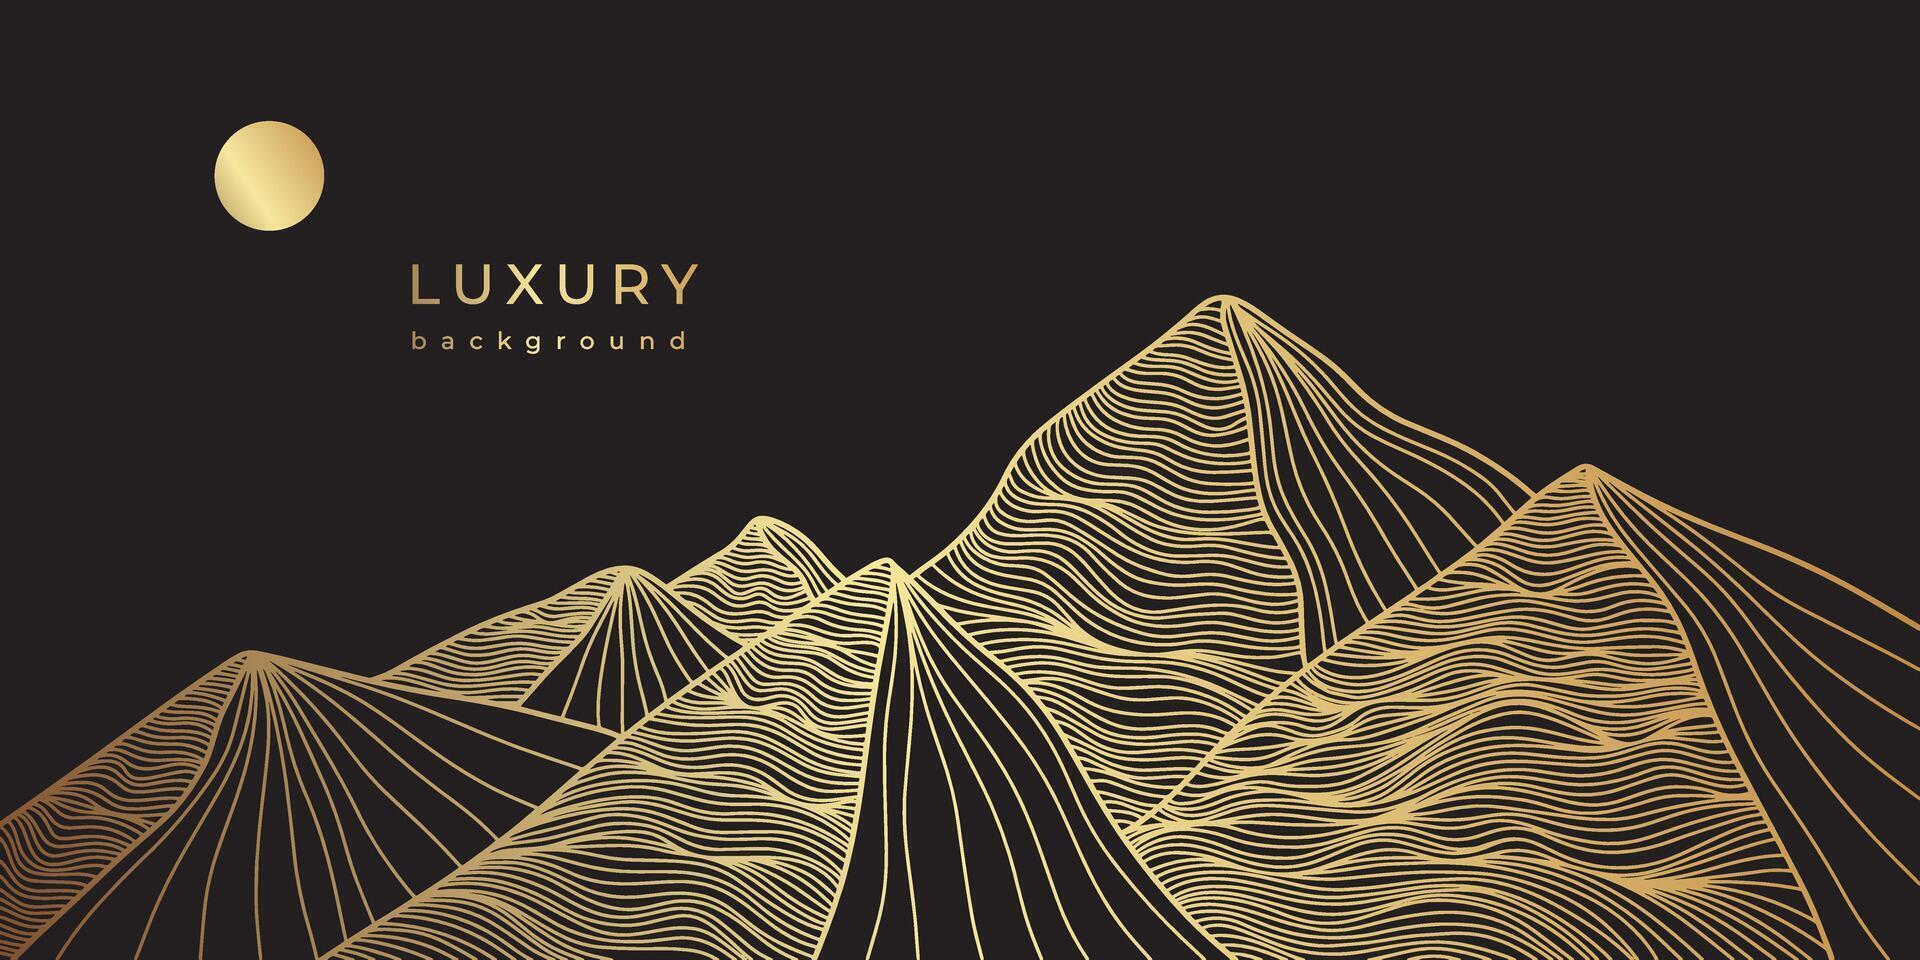 Luxury linear golden mountains. Sand pyramids. Desert. Abstract landscape. Minimalist wall art. Line art background design. Linear hills with striped pattern. Vector illustration. Gold color banner.